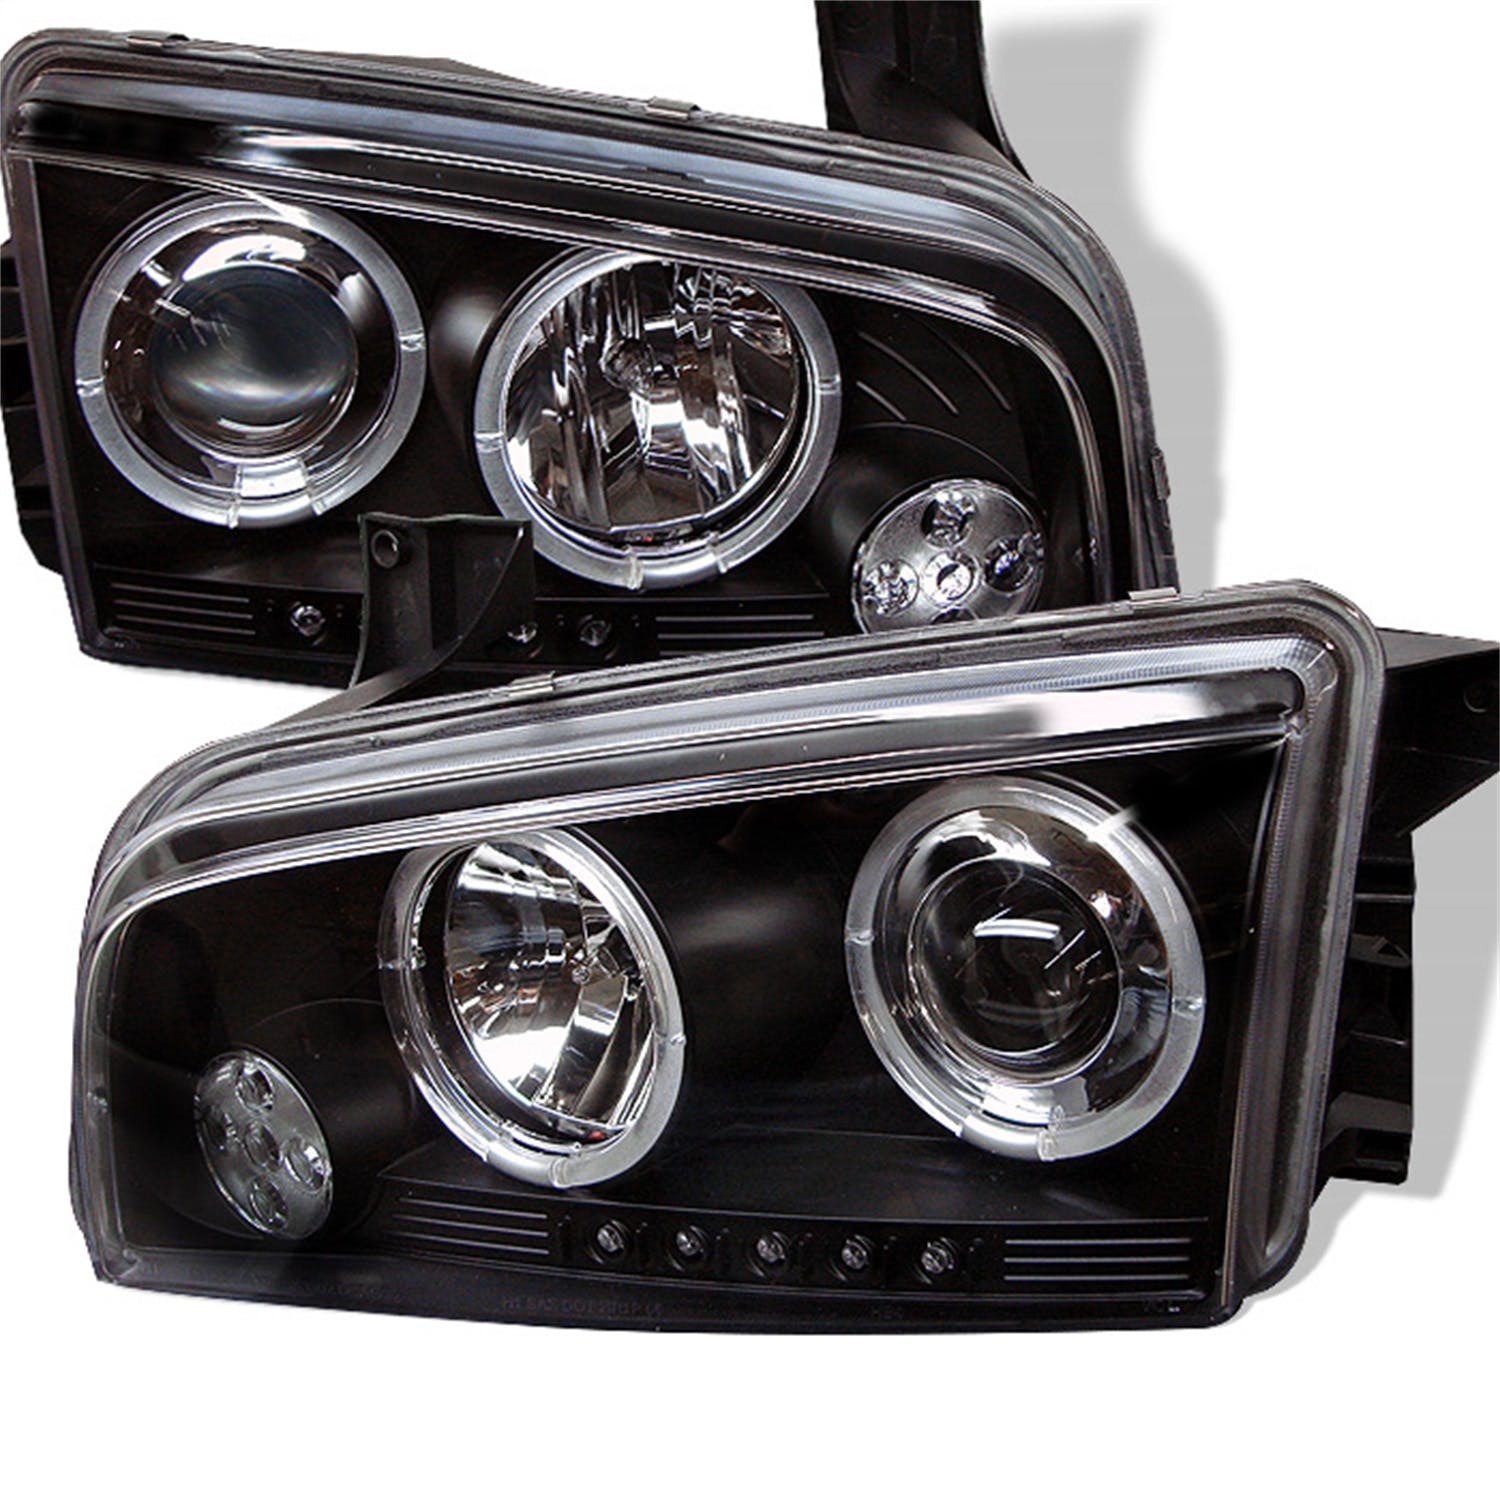 Spyder Auto 5009739 (Spyder) Dodge Charger 06-10 Projector Headlights-Halogen Model Only ( Not Compa